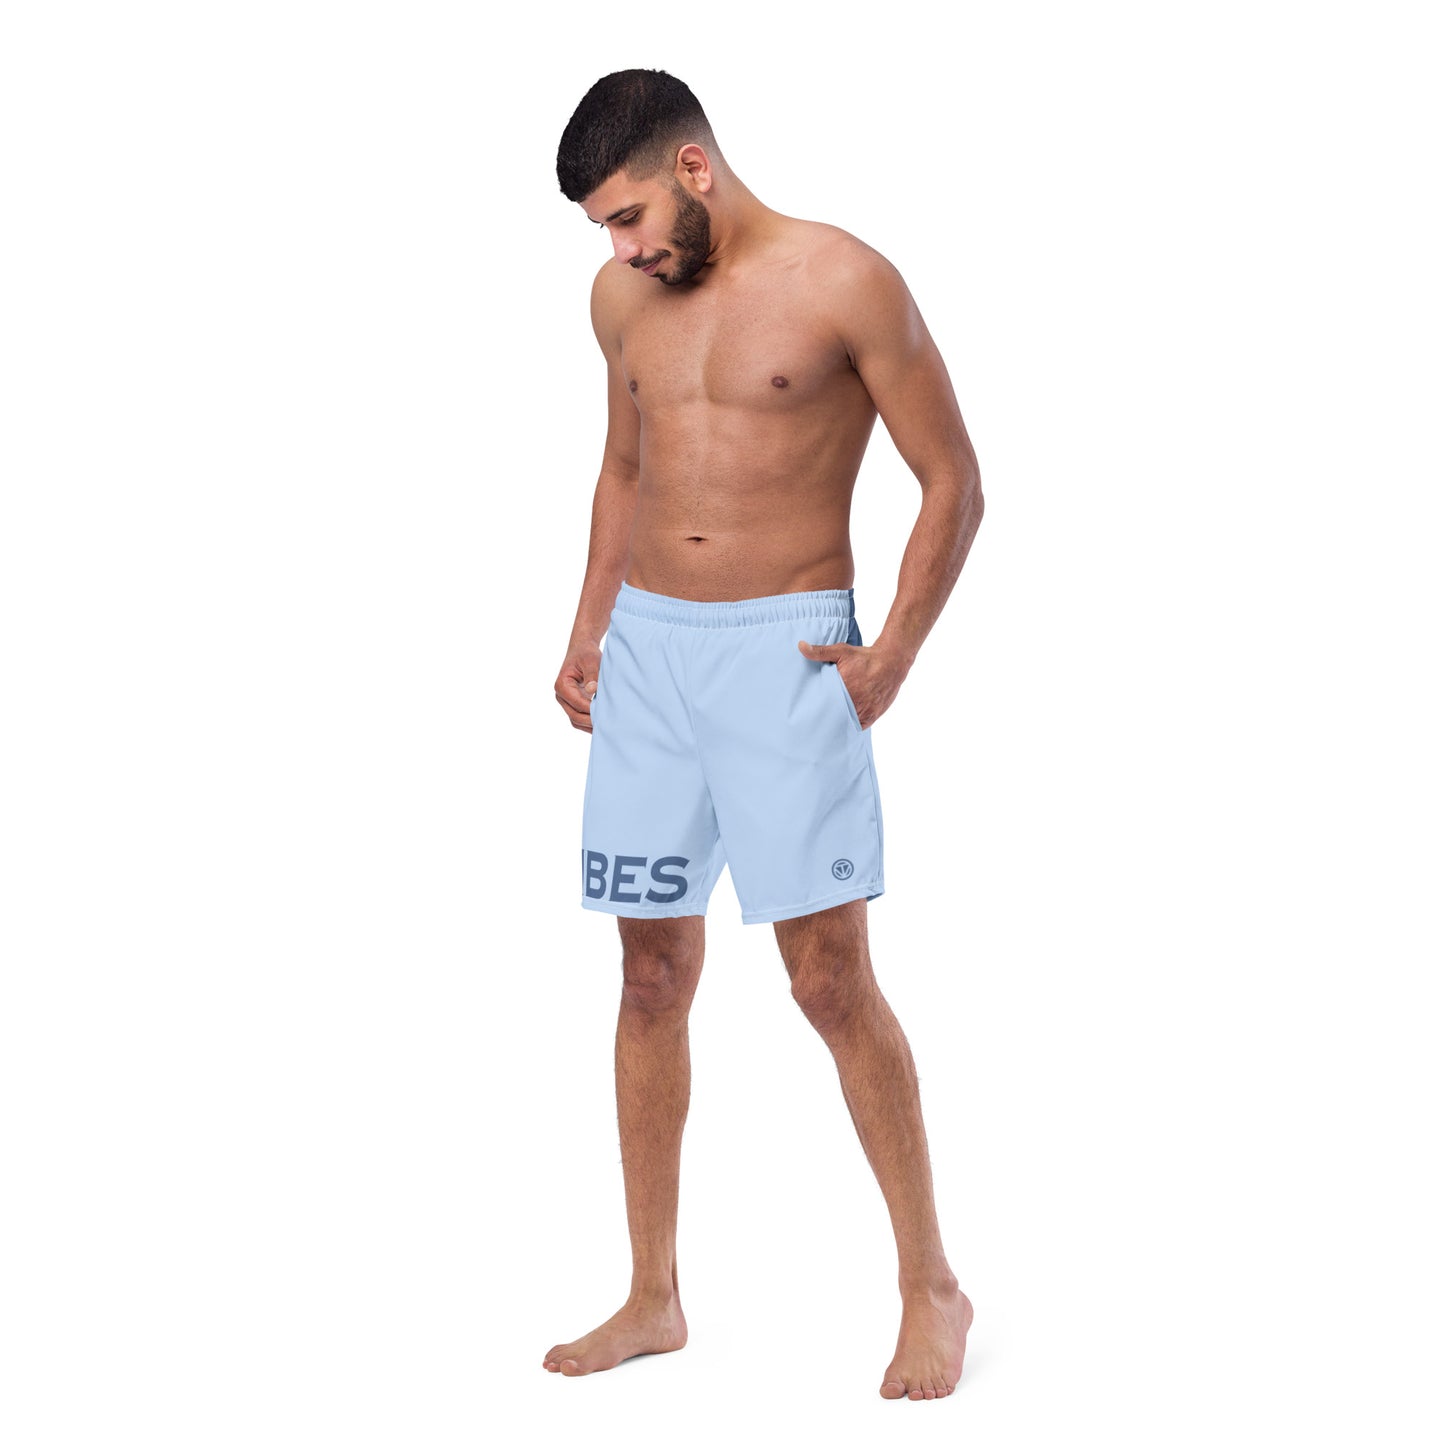 TIME OF VIBES - Men's Swim Trunks VIBES DUO (Hawkes/Kashmir Blue) - €59.00